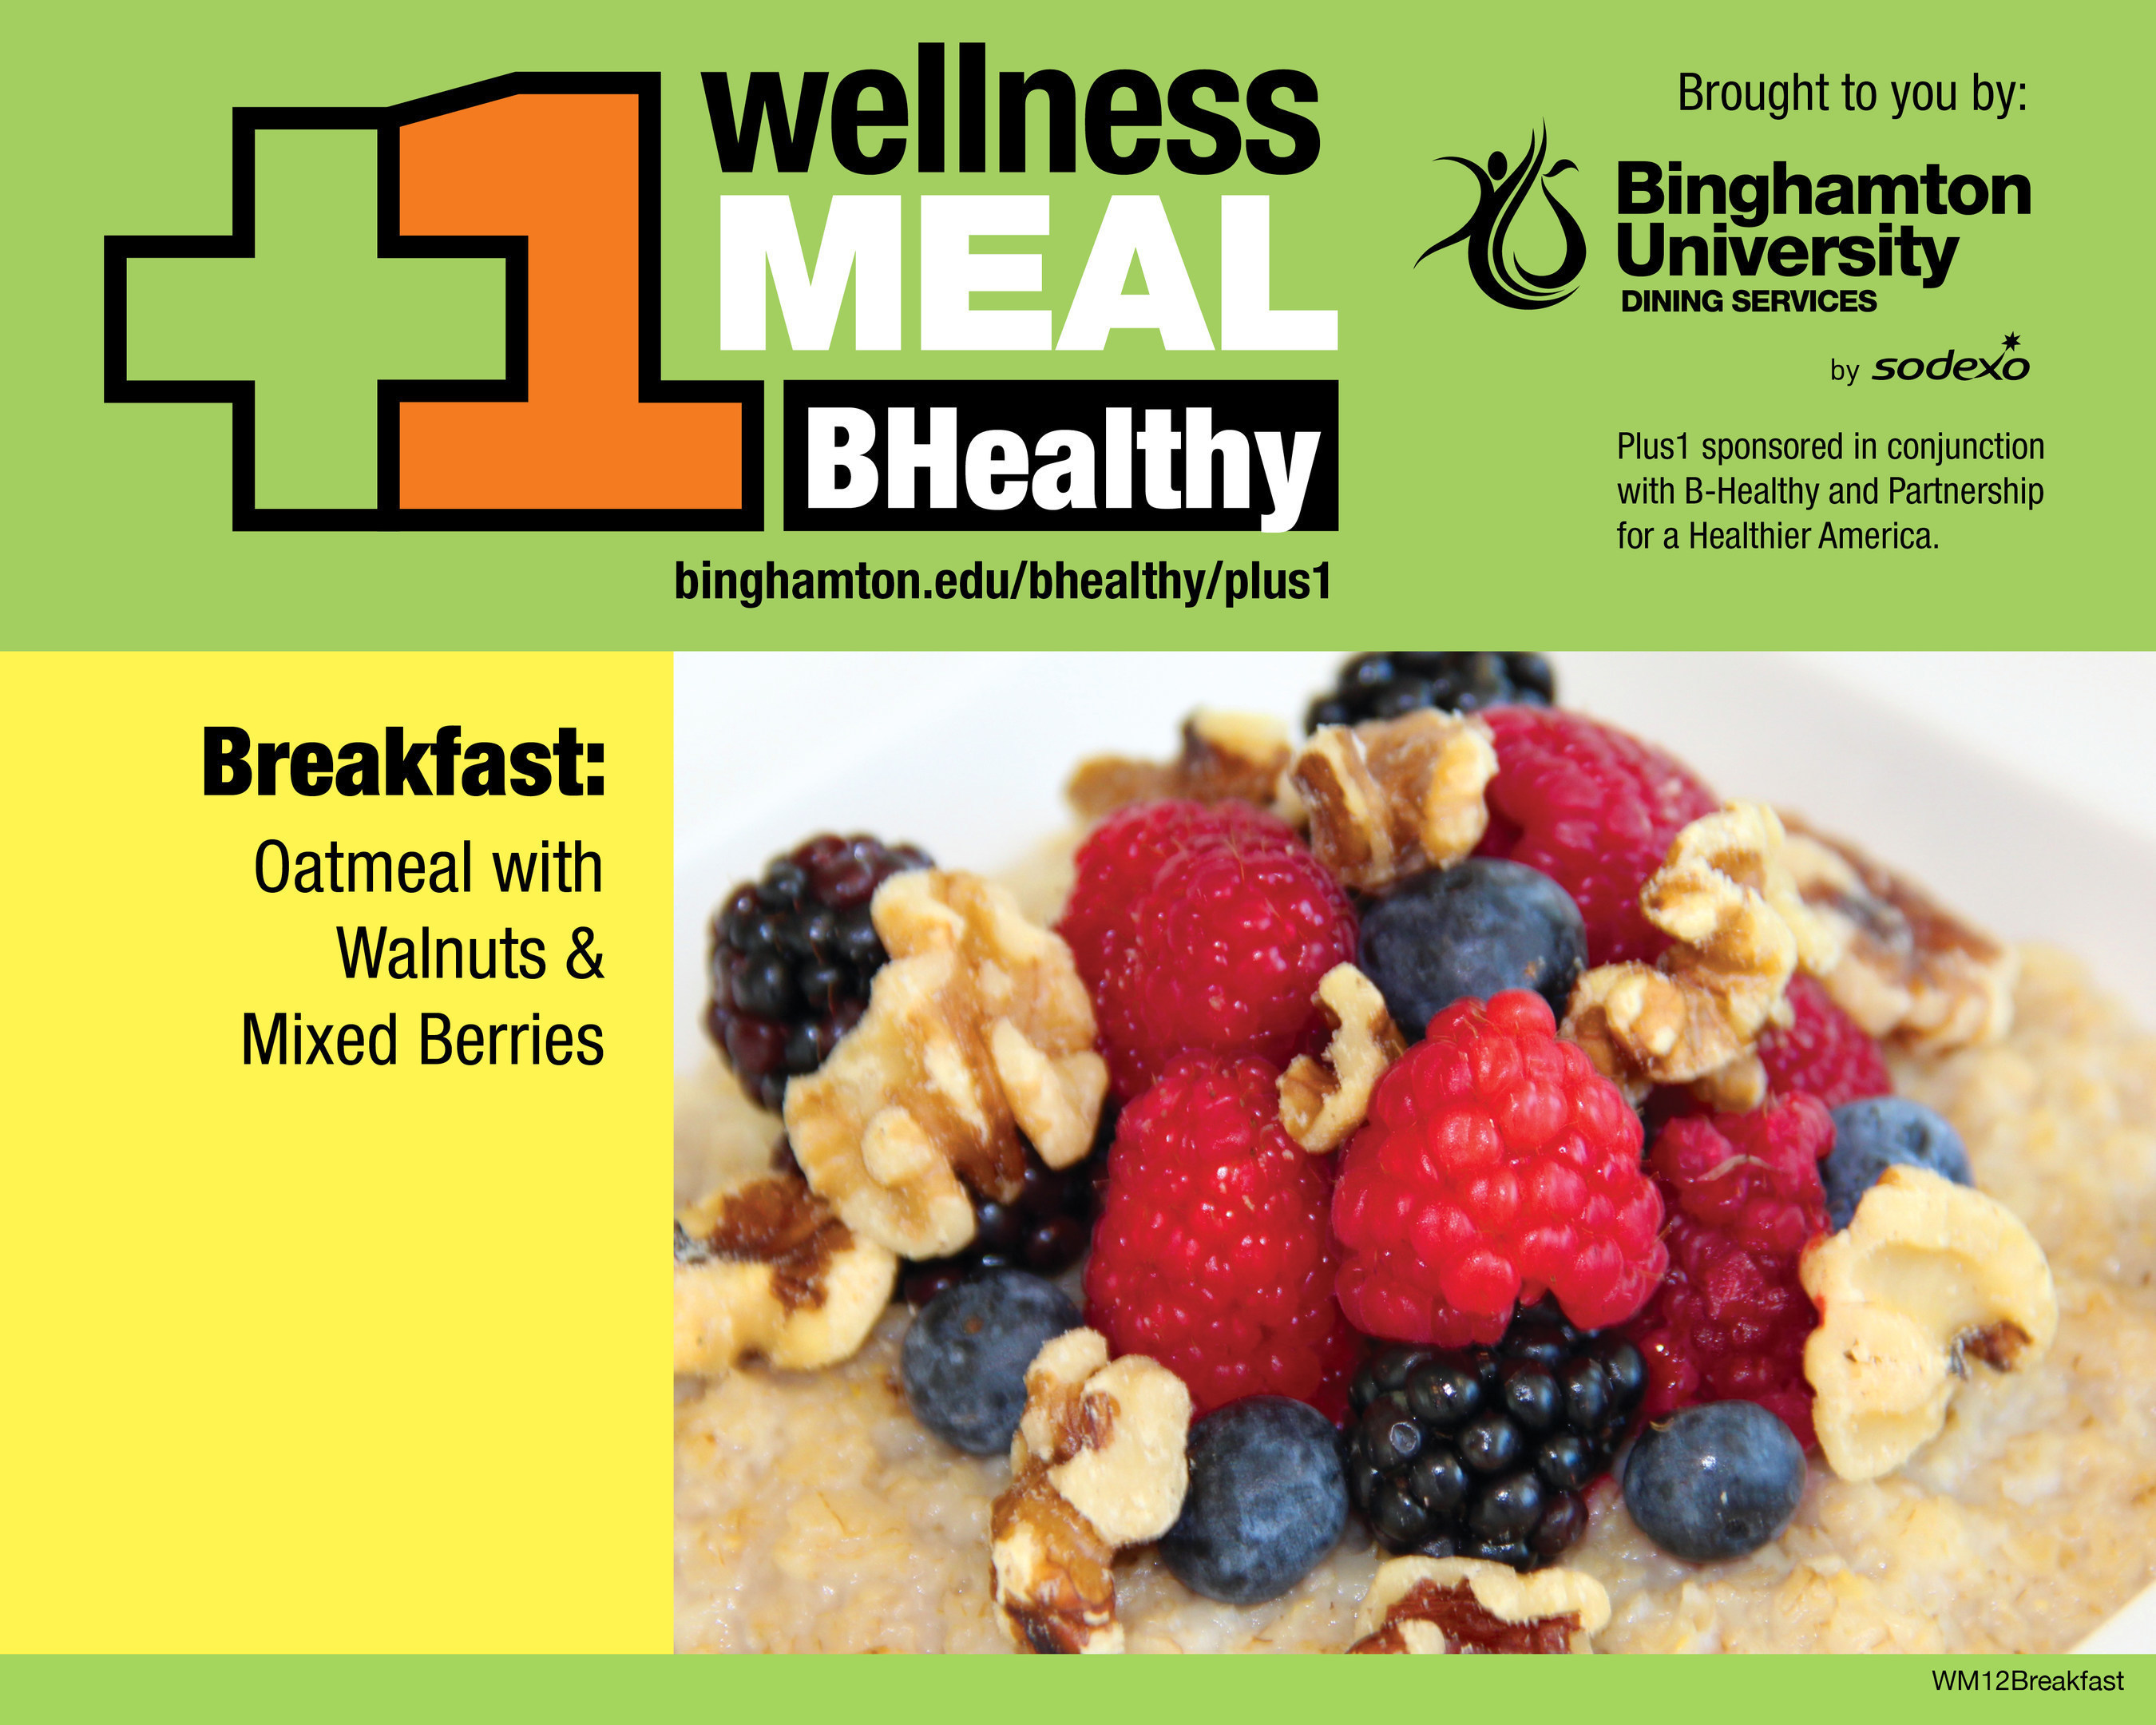 B-Healthy Wellness Meal at Binghamton University - Oatmeal with Walnuts and Mixed Berries